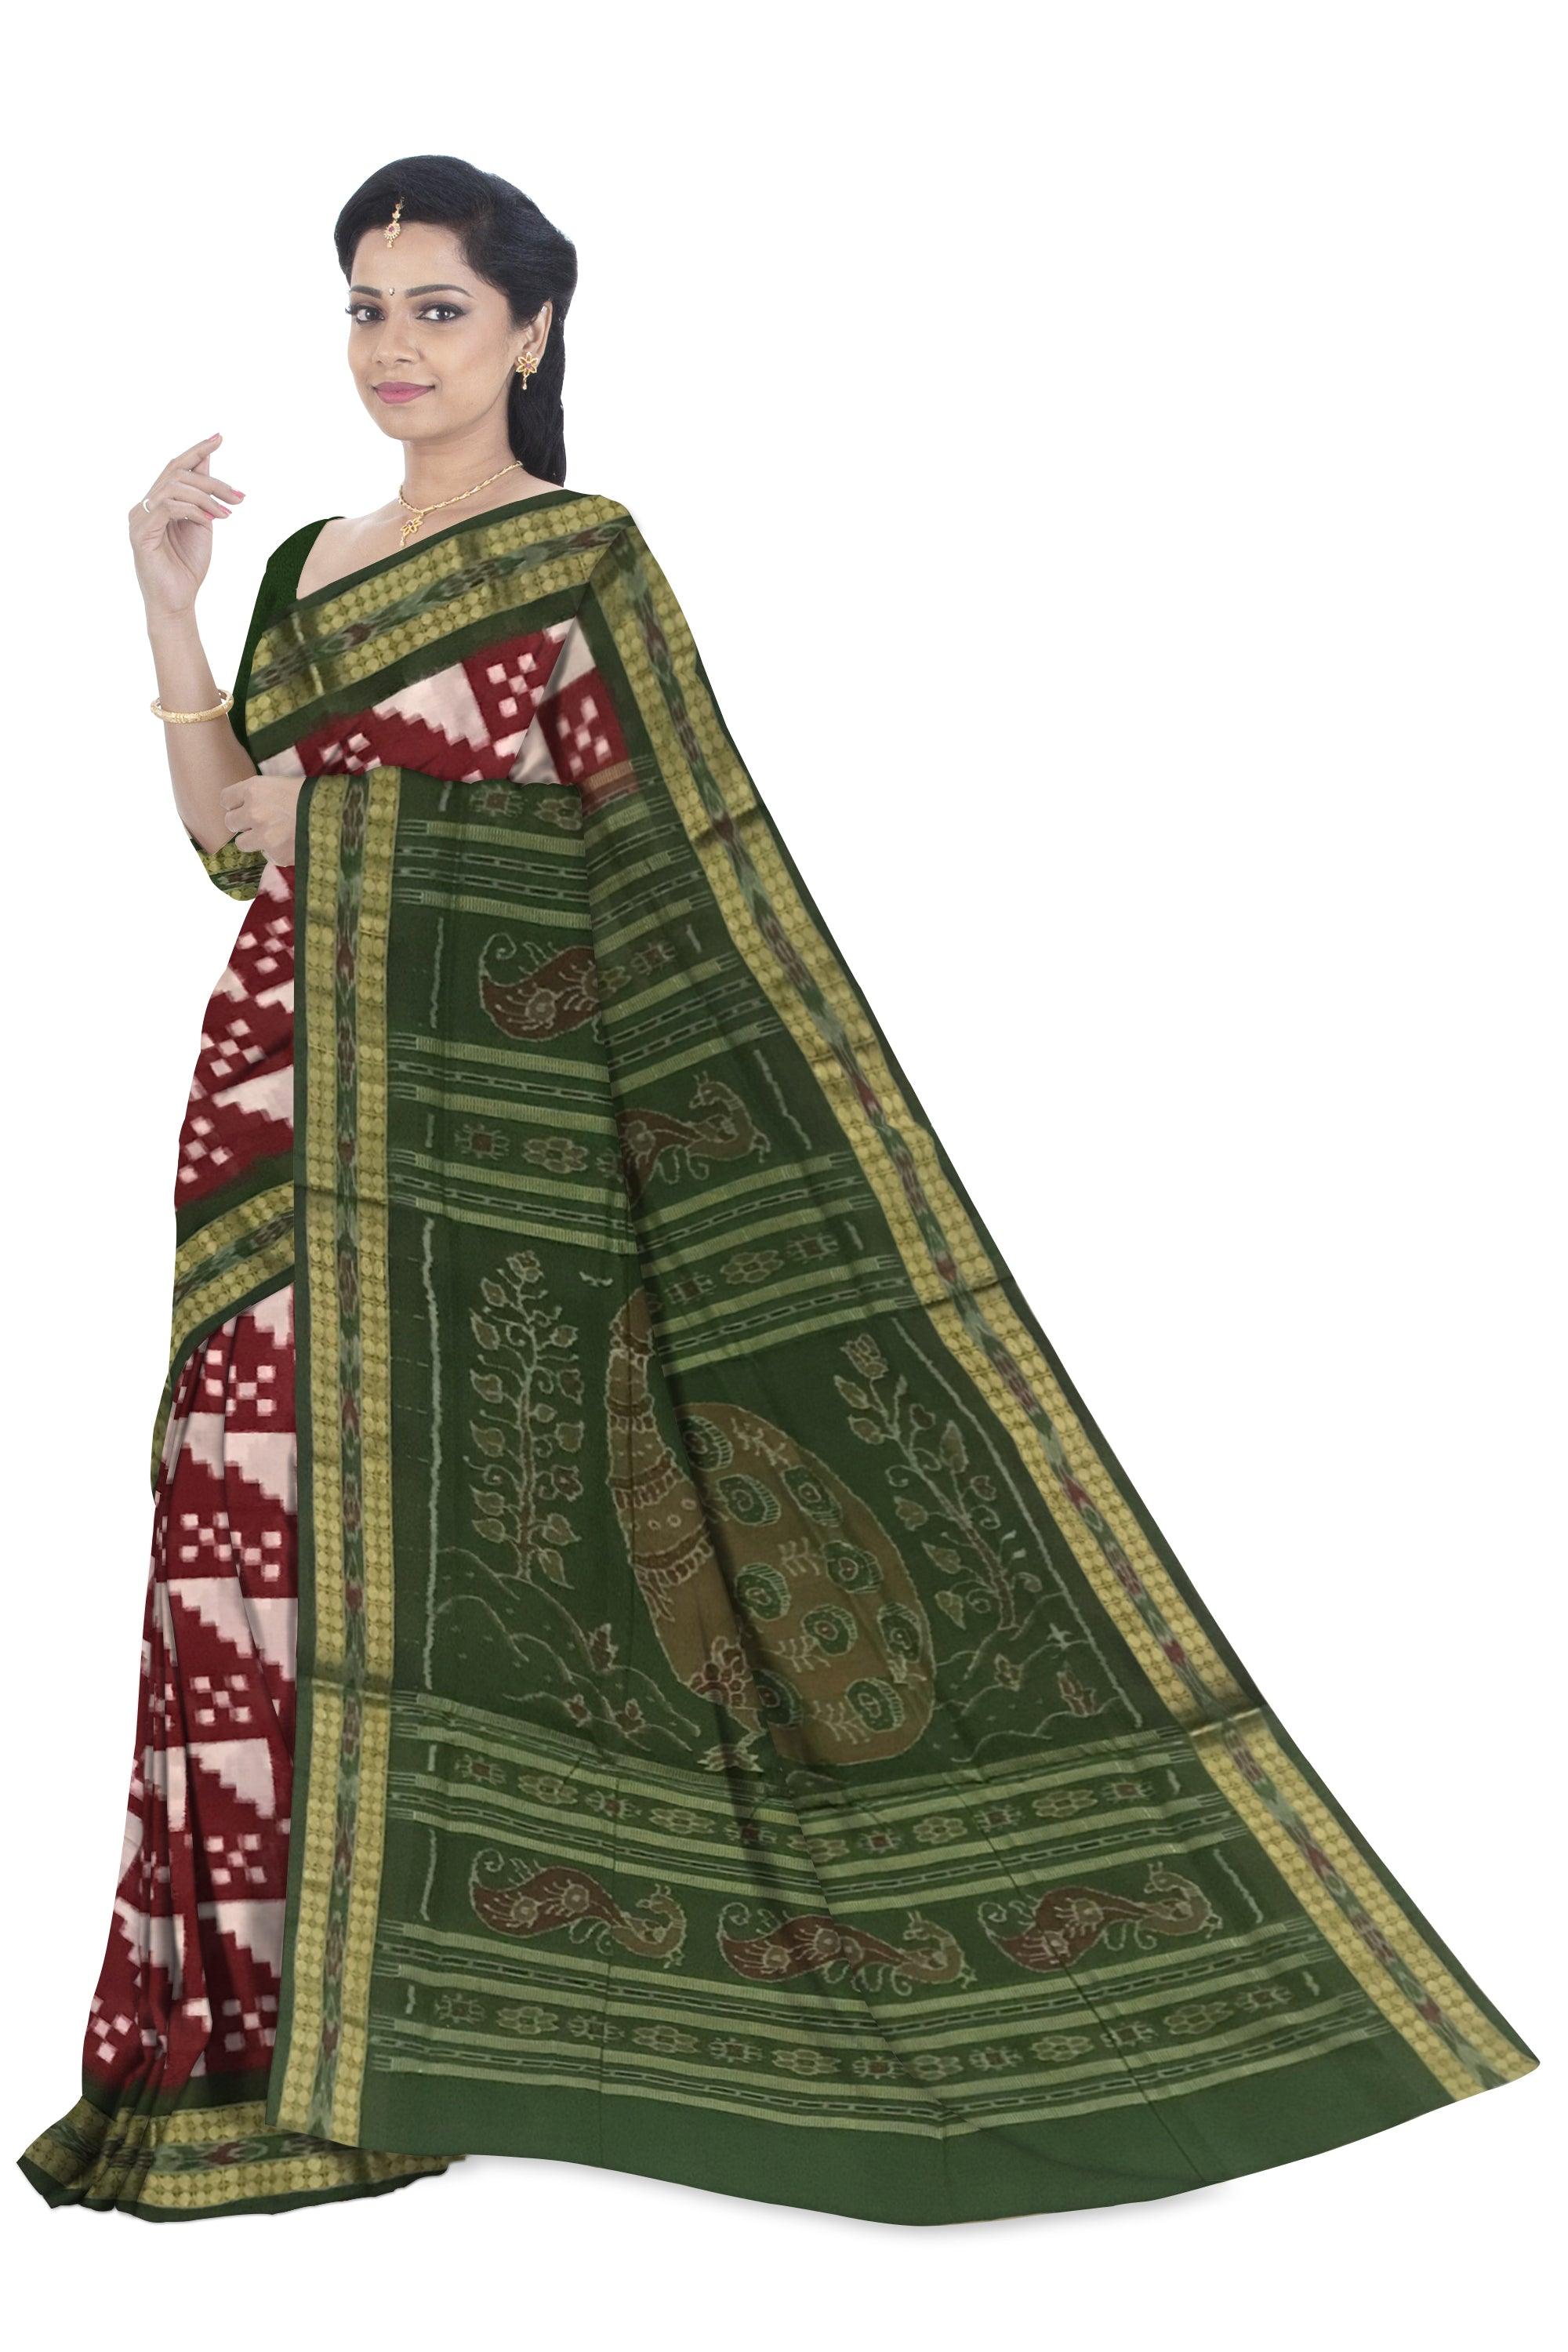 MAROON WITH WHITE COLOR BASE TRINGAL PATTERN COTTON SAREE , COMES WITH BLOUSE PIECE. - Koshali Arts & Crafts Enterprise